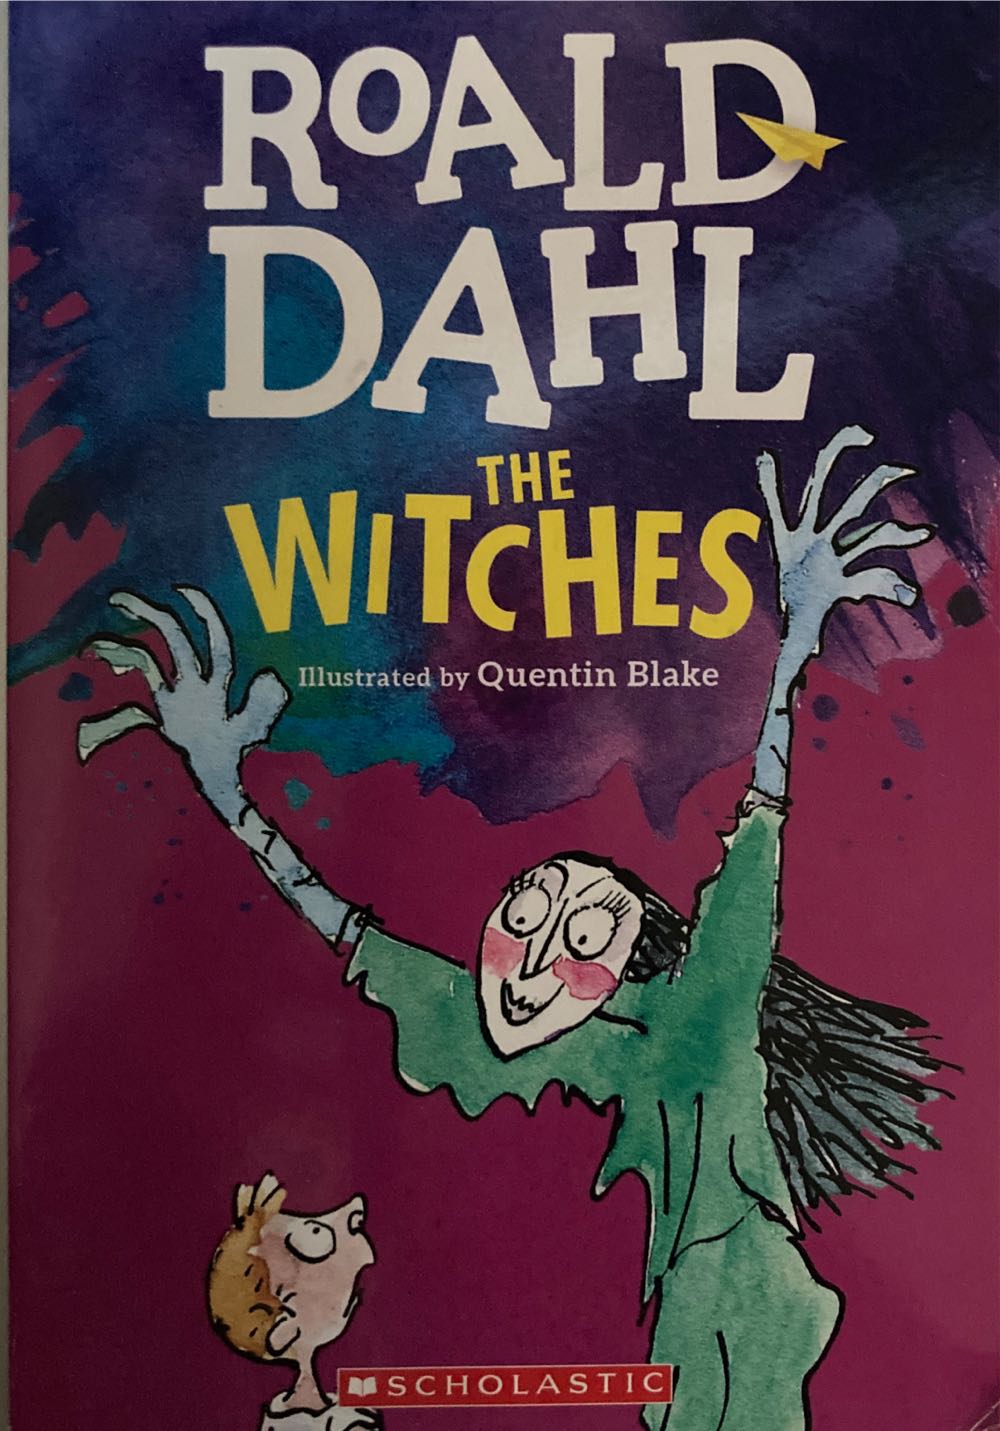 Witches, The - Roald Dahl (Scholastic Inc - Paperback) book collectible [Barcode 9780590032490] - Main Image 3